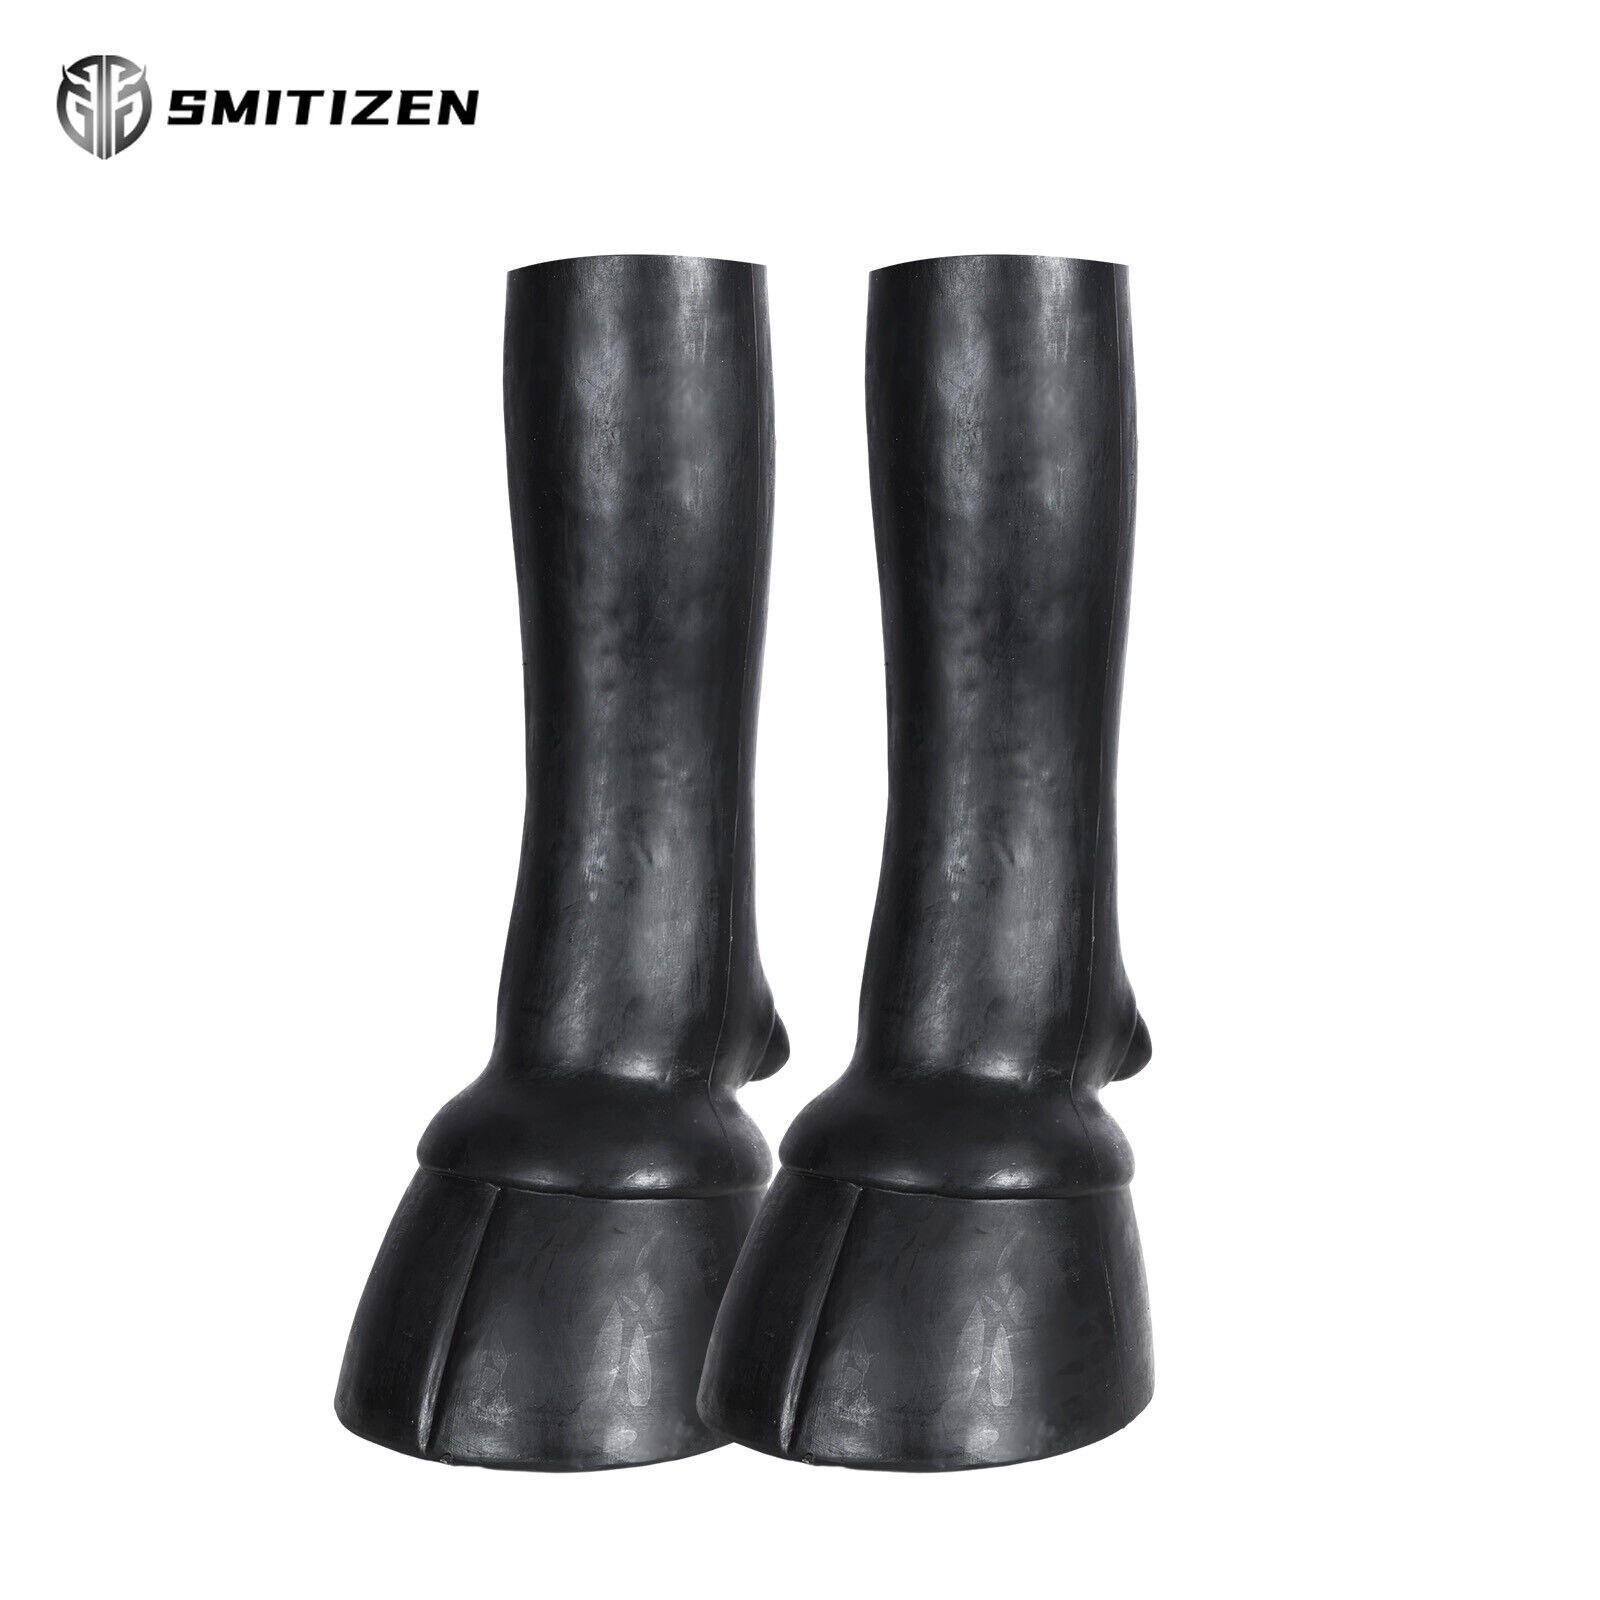 Smitizen Silicone Black Hoof Gloves Cosplay Costumes For Halloween Party Fetish